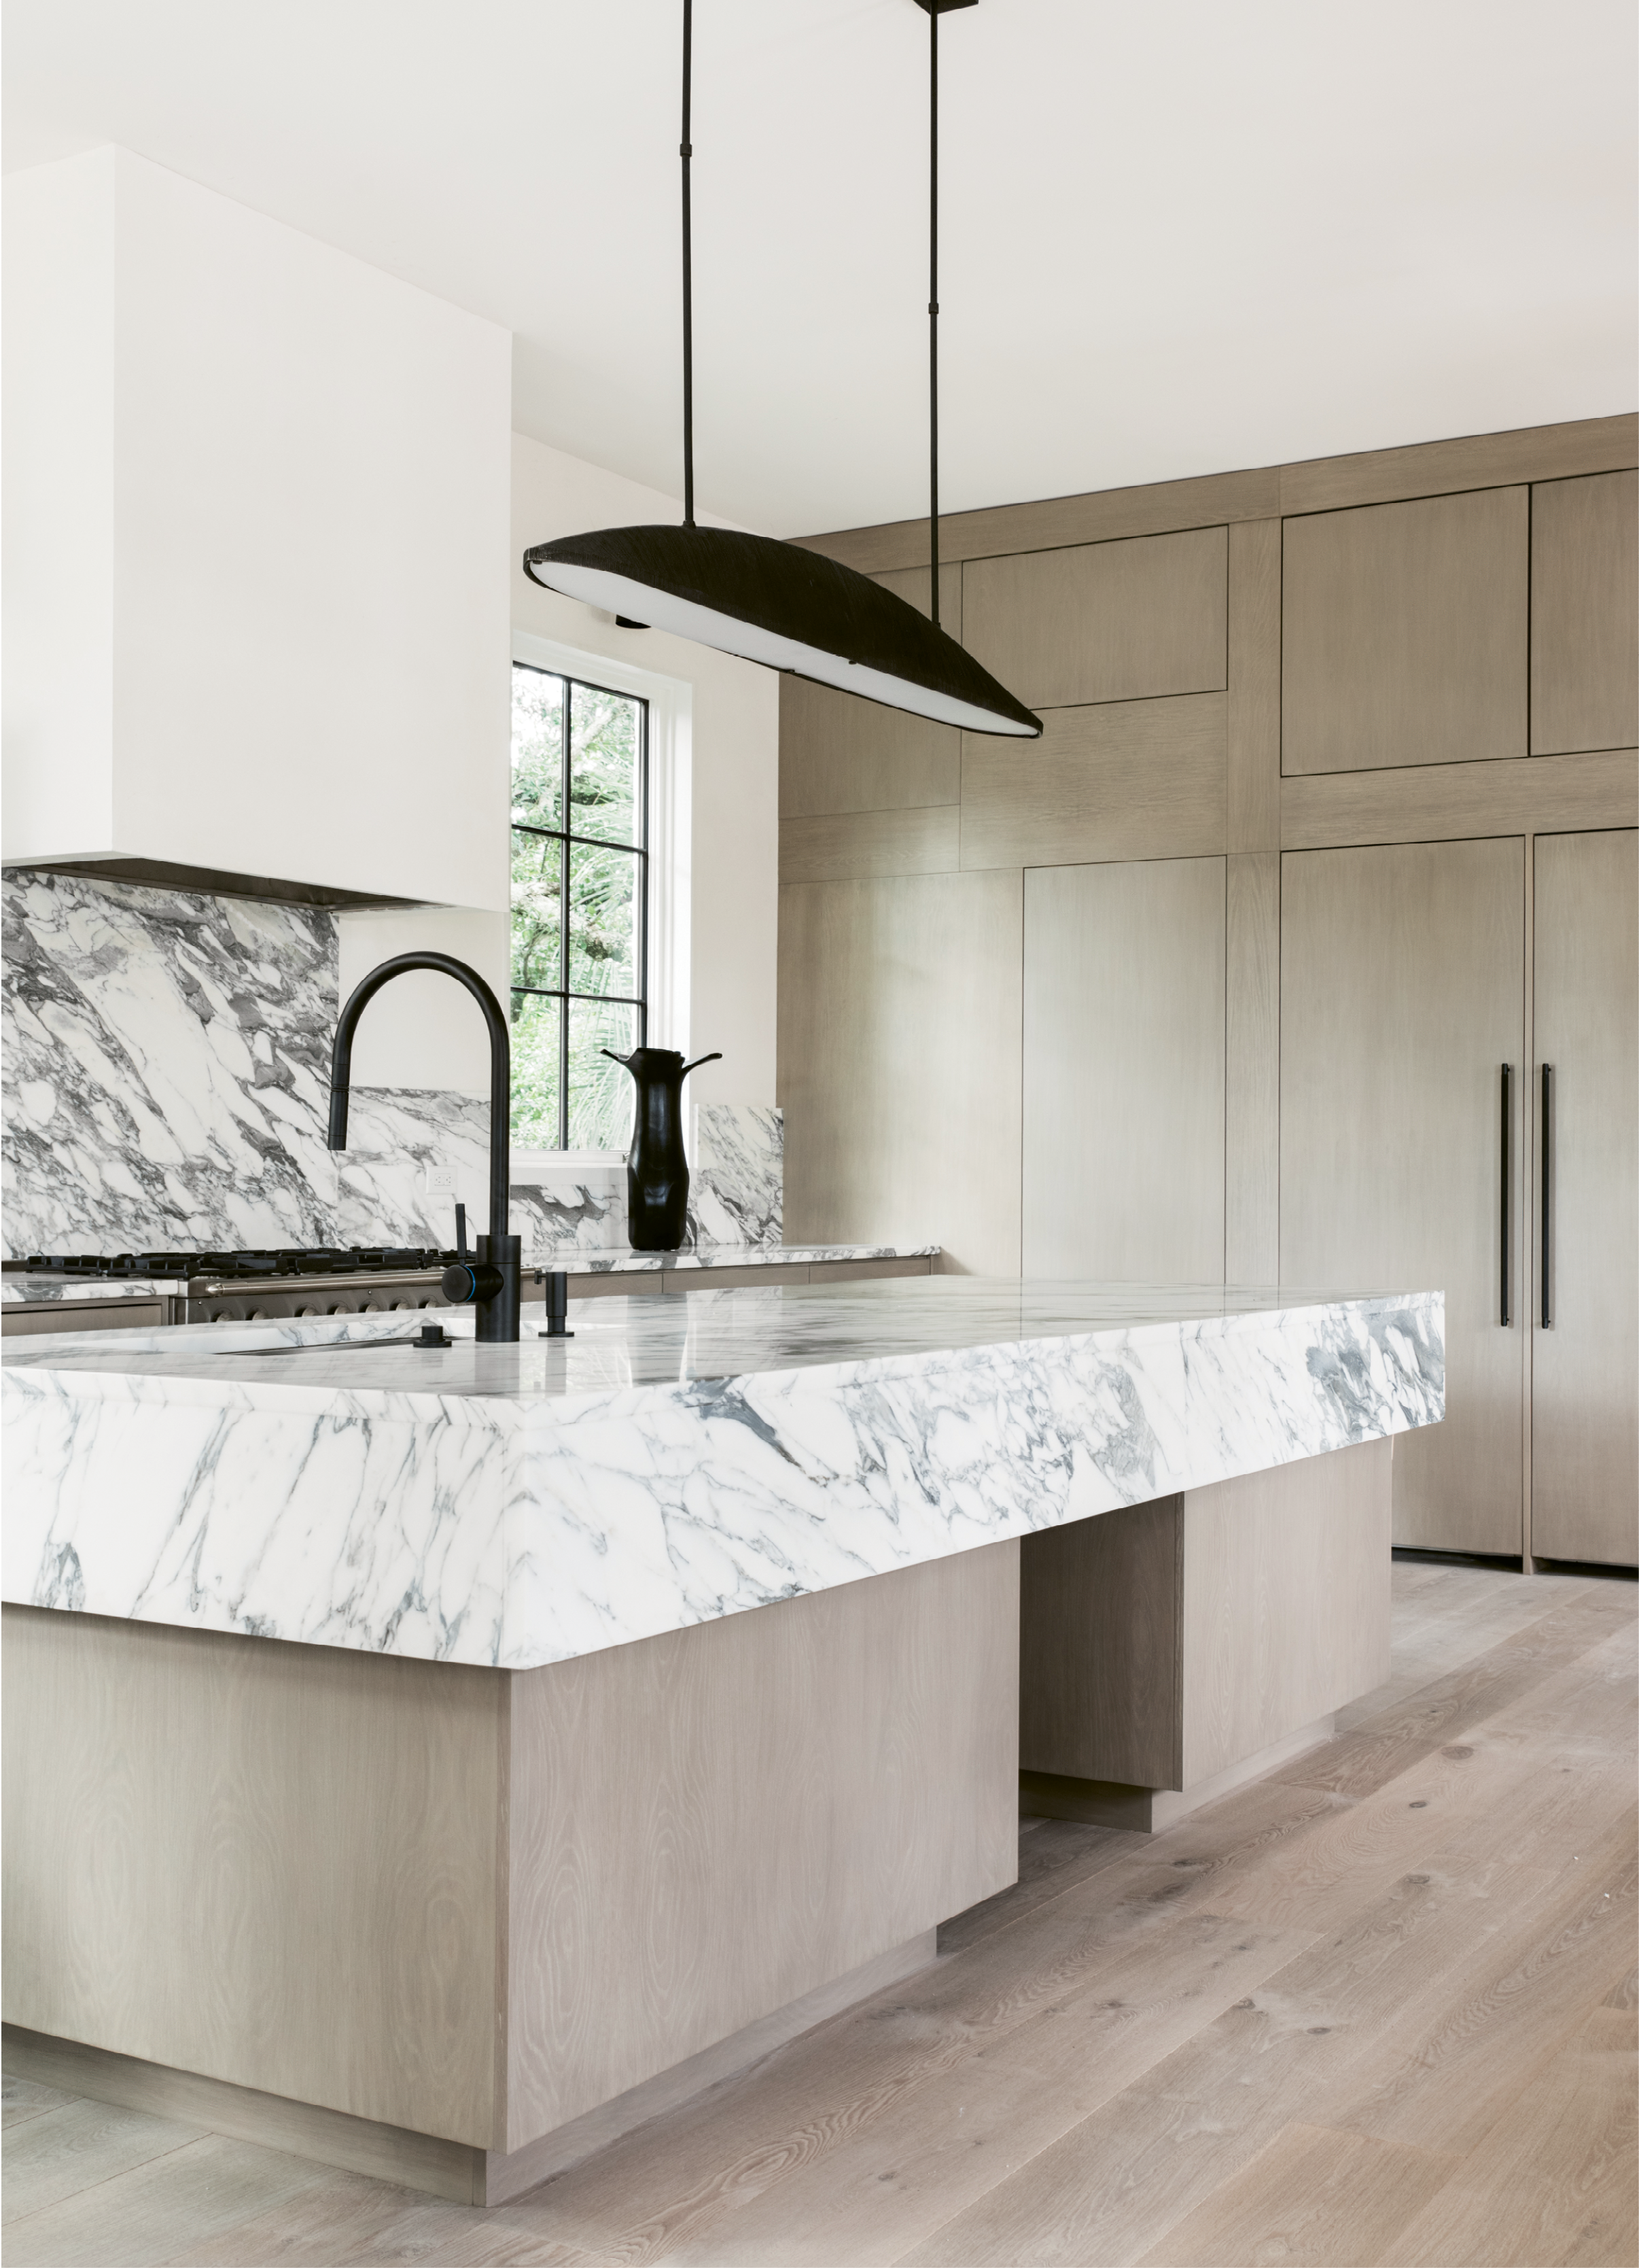 In the light and airy kitchen, white marble countertops with bold black veining make a strong visual impact.